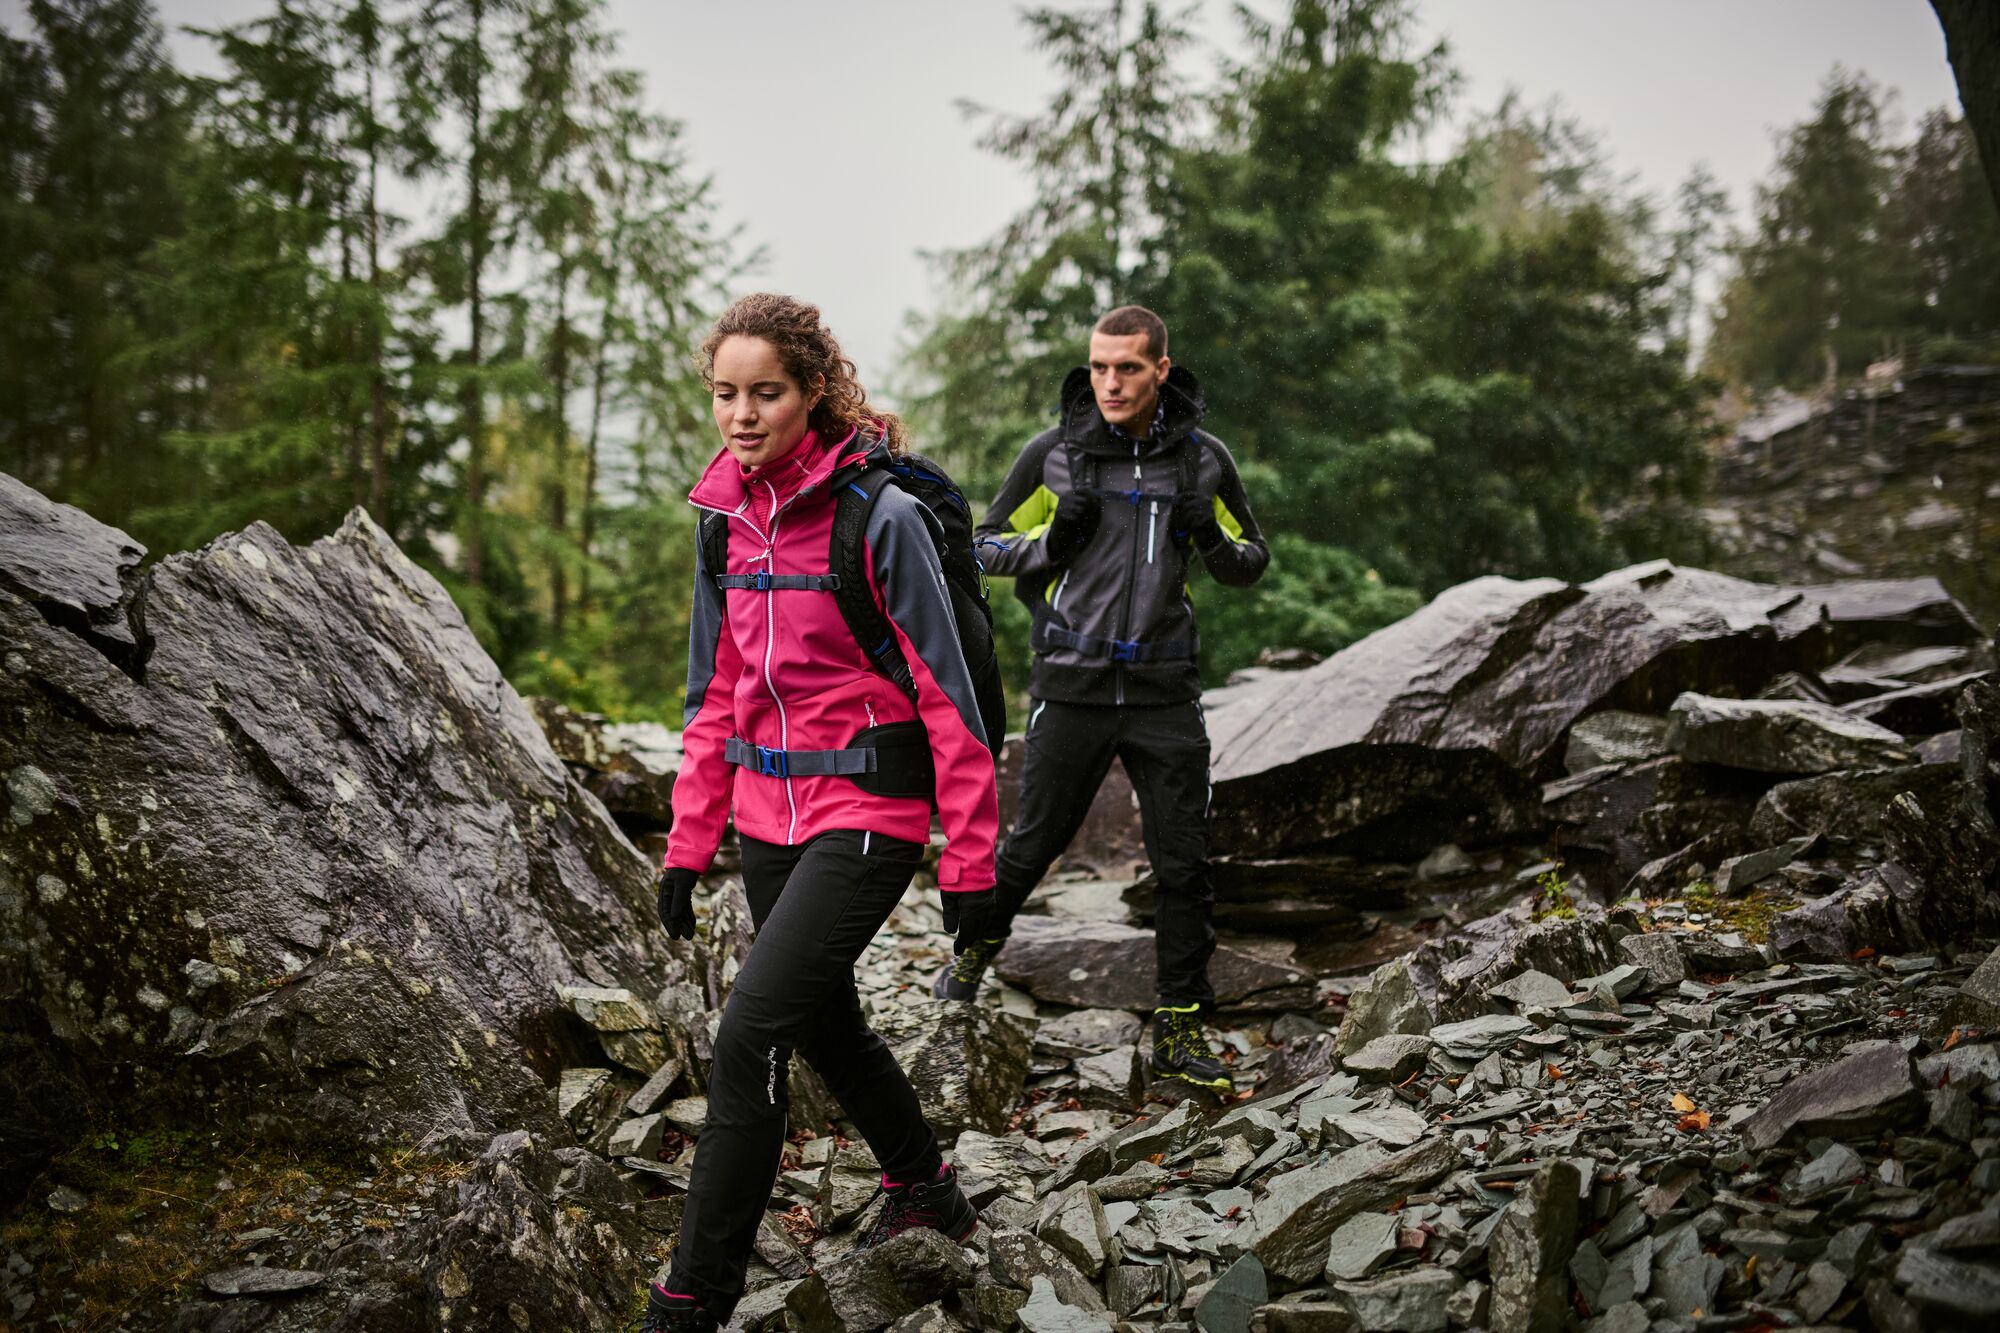 A man and a woman backpacking through a rocky trail